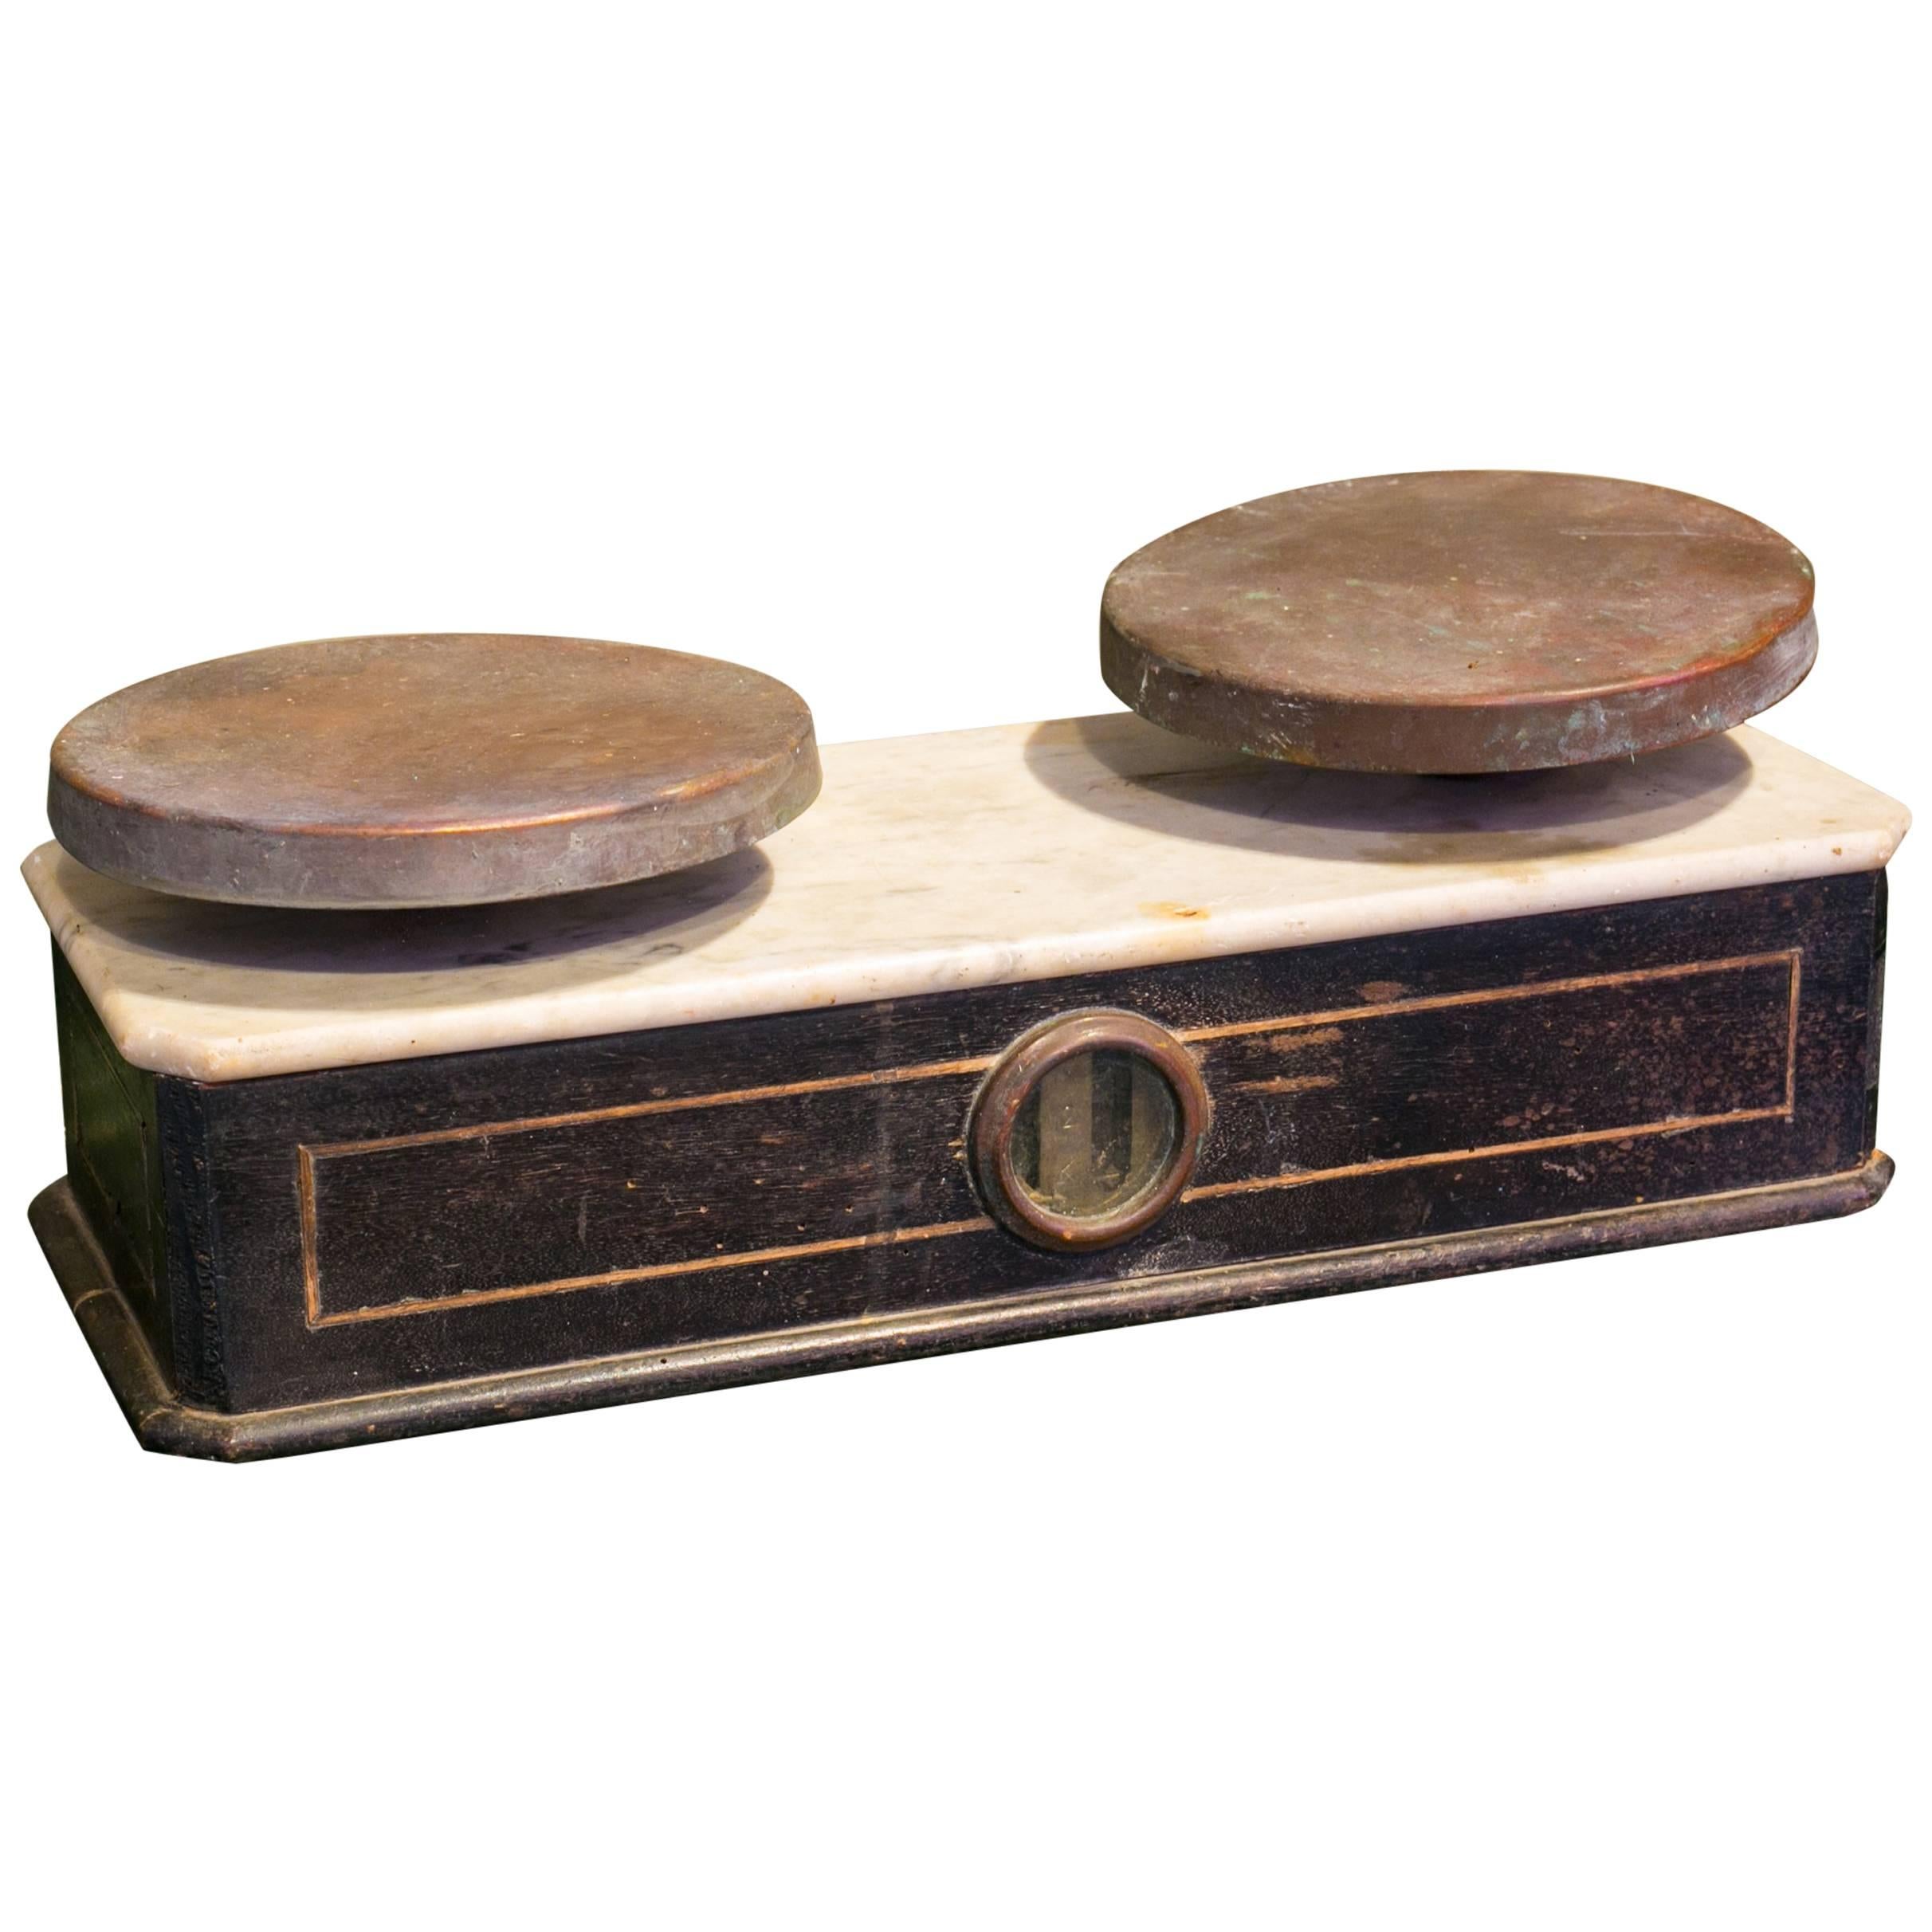 Antique French Marble-Topped Scale 